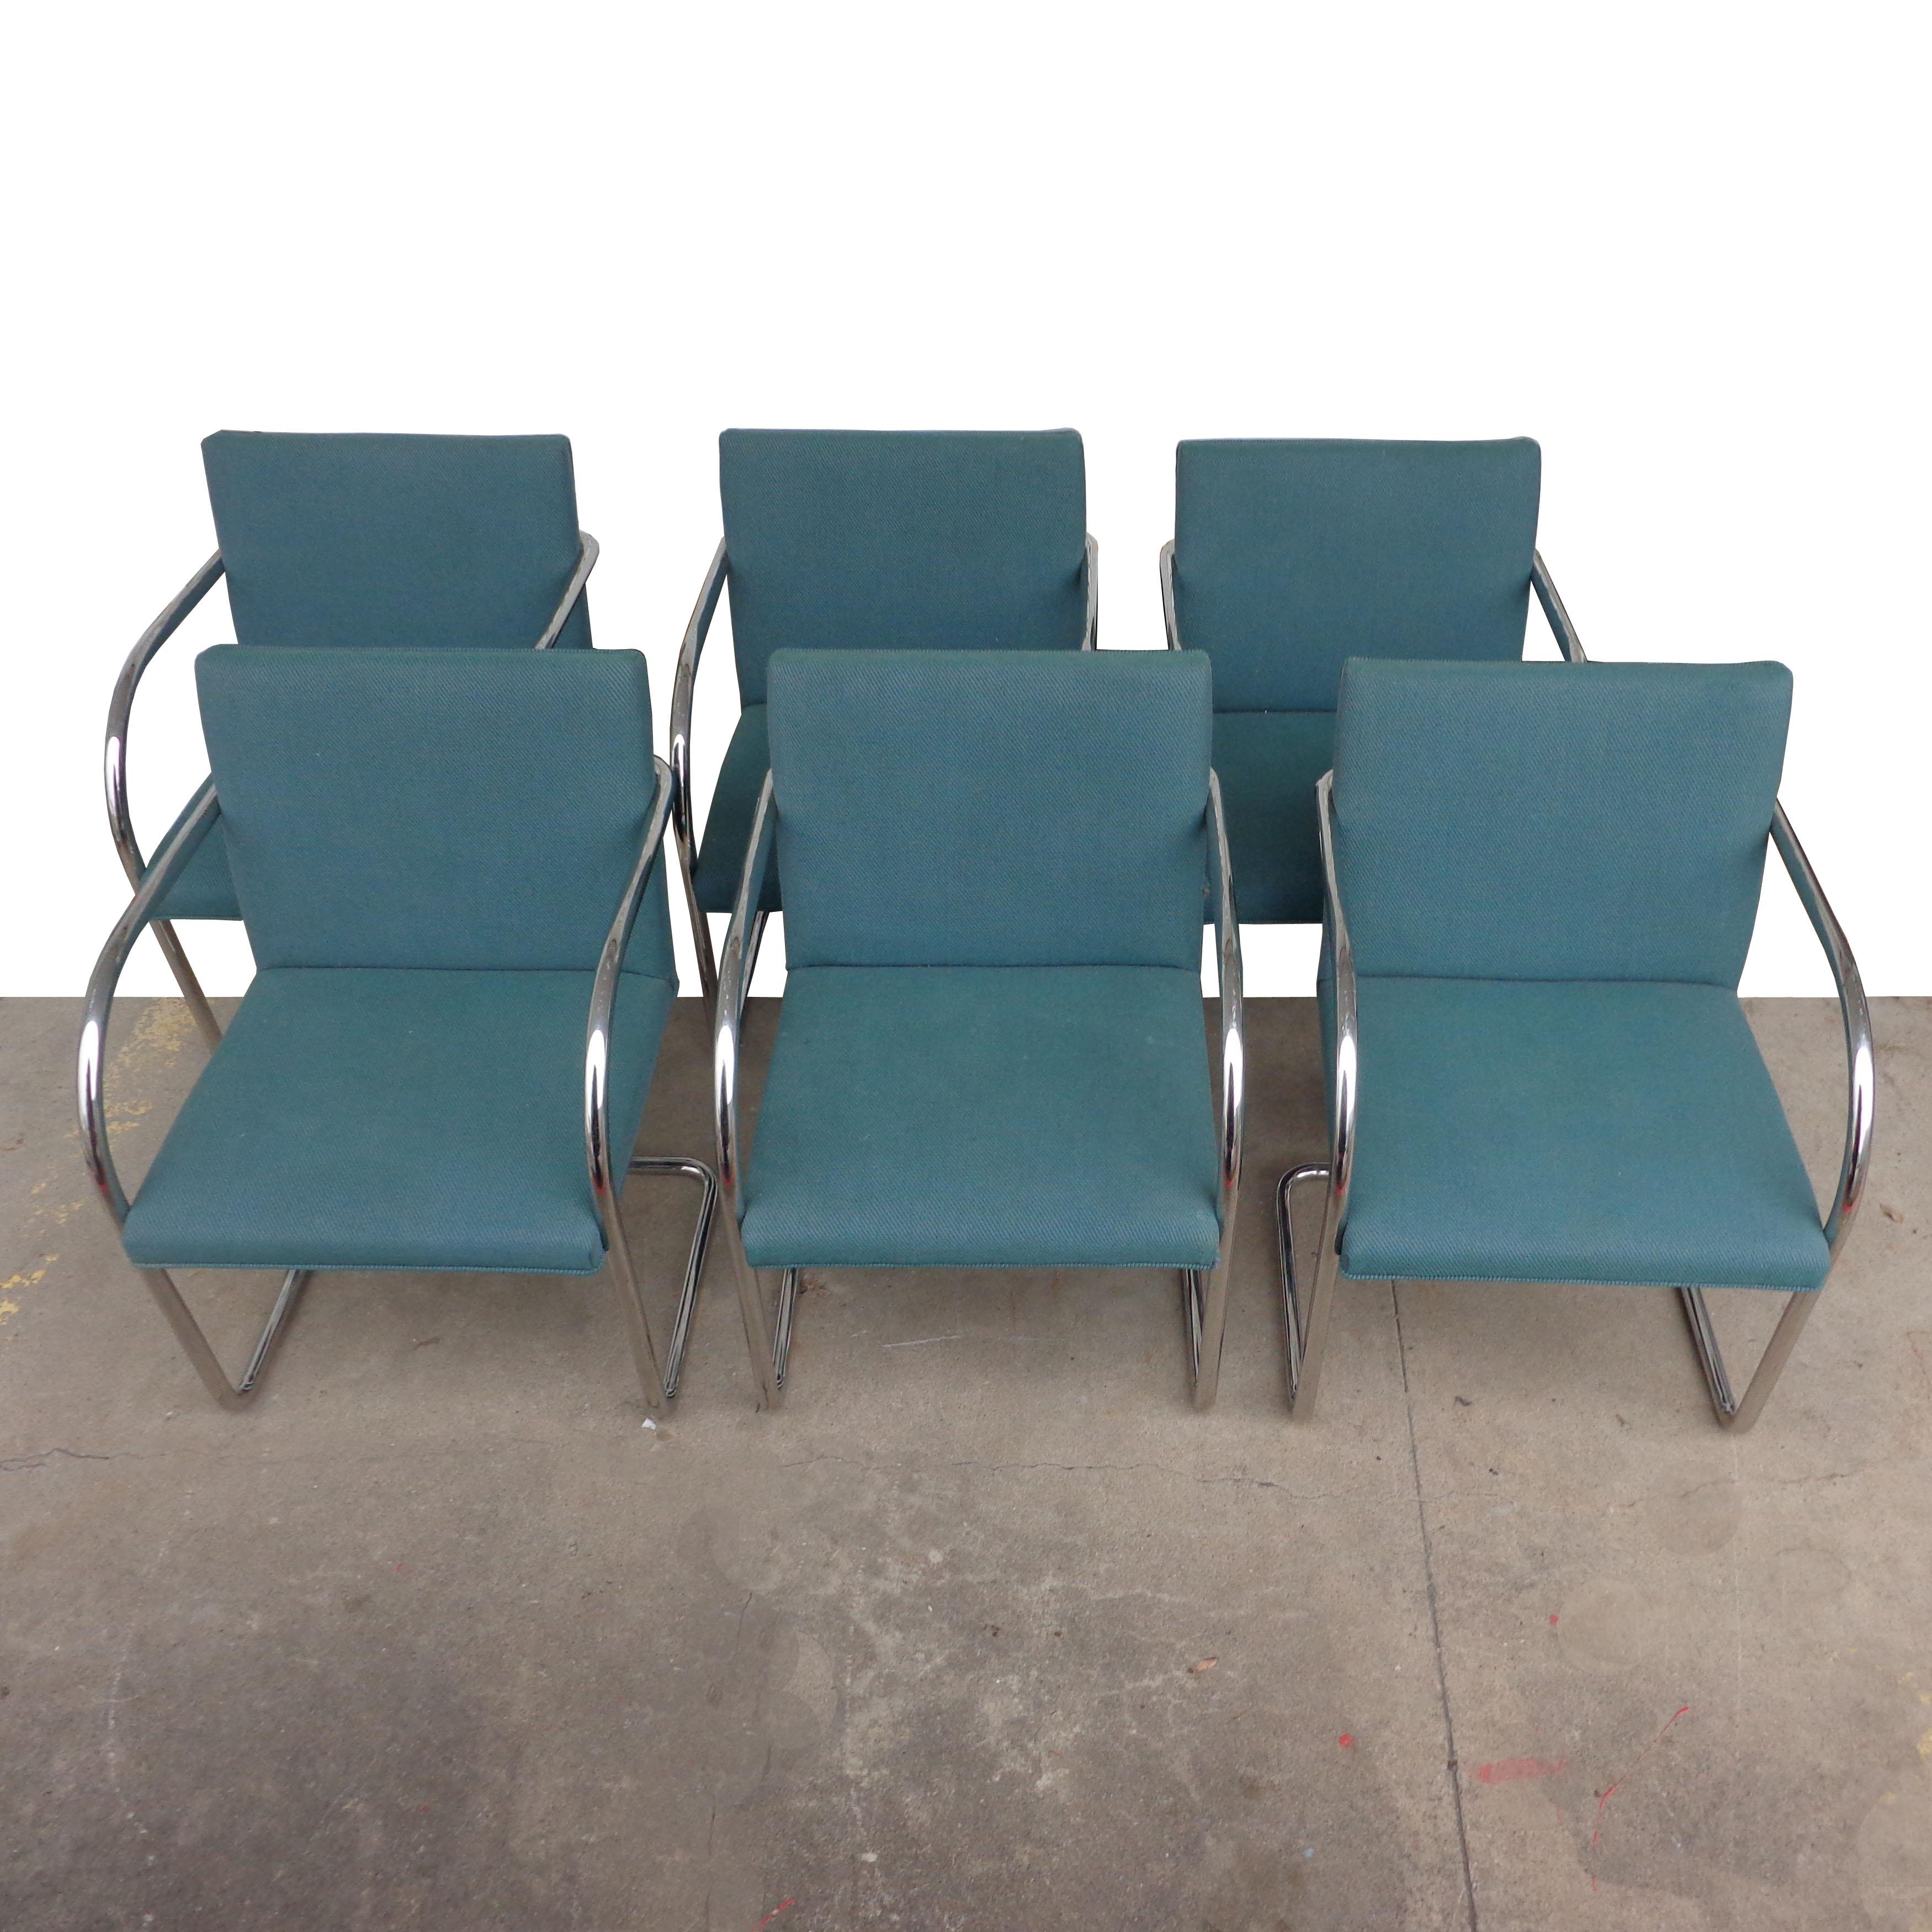 Set of 6 Brueton Brno Chairs In Good Condition For Sale In Pasadena, TX